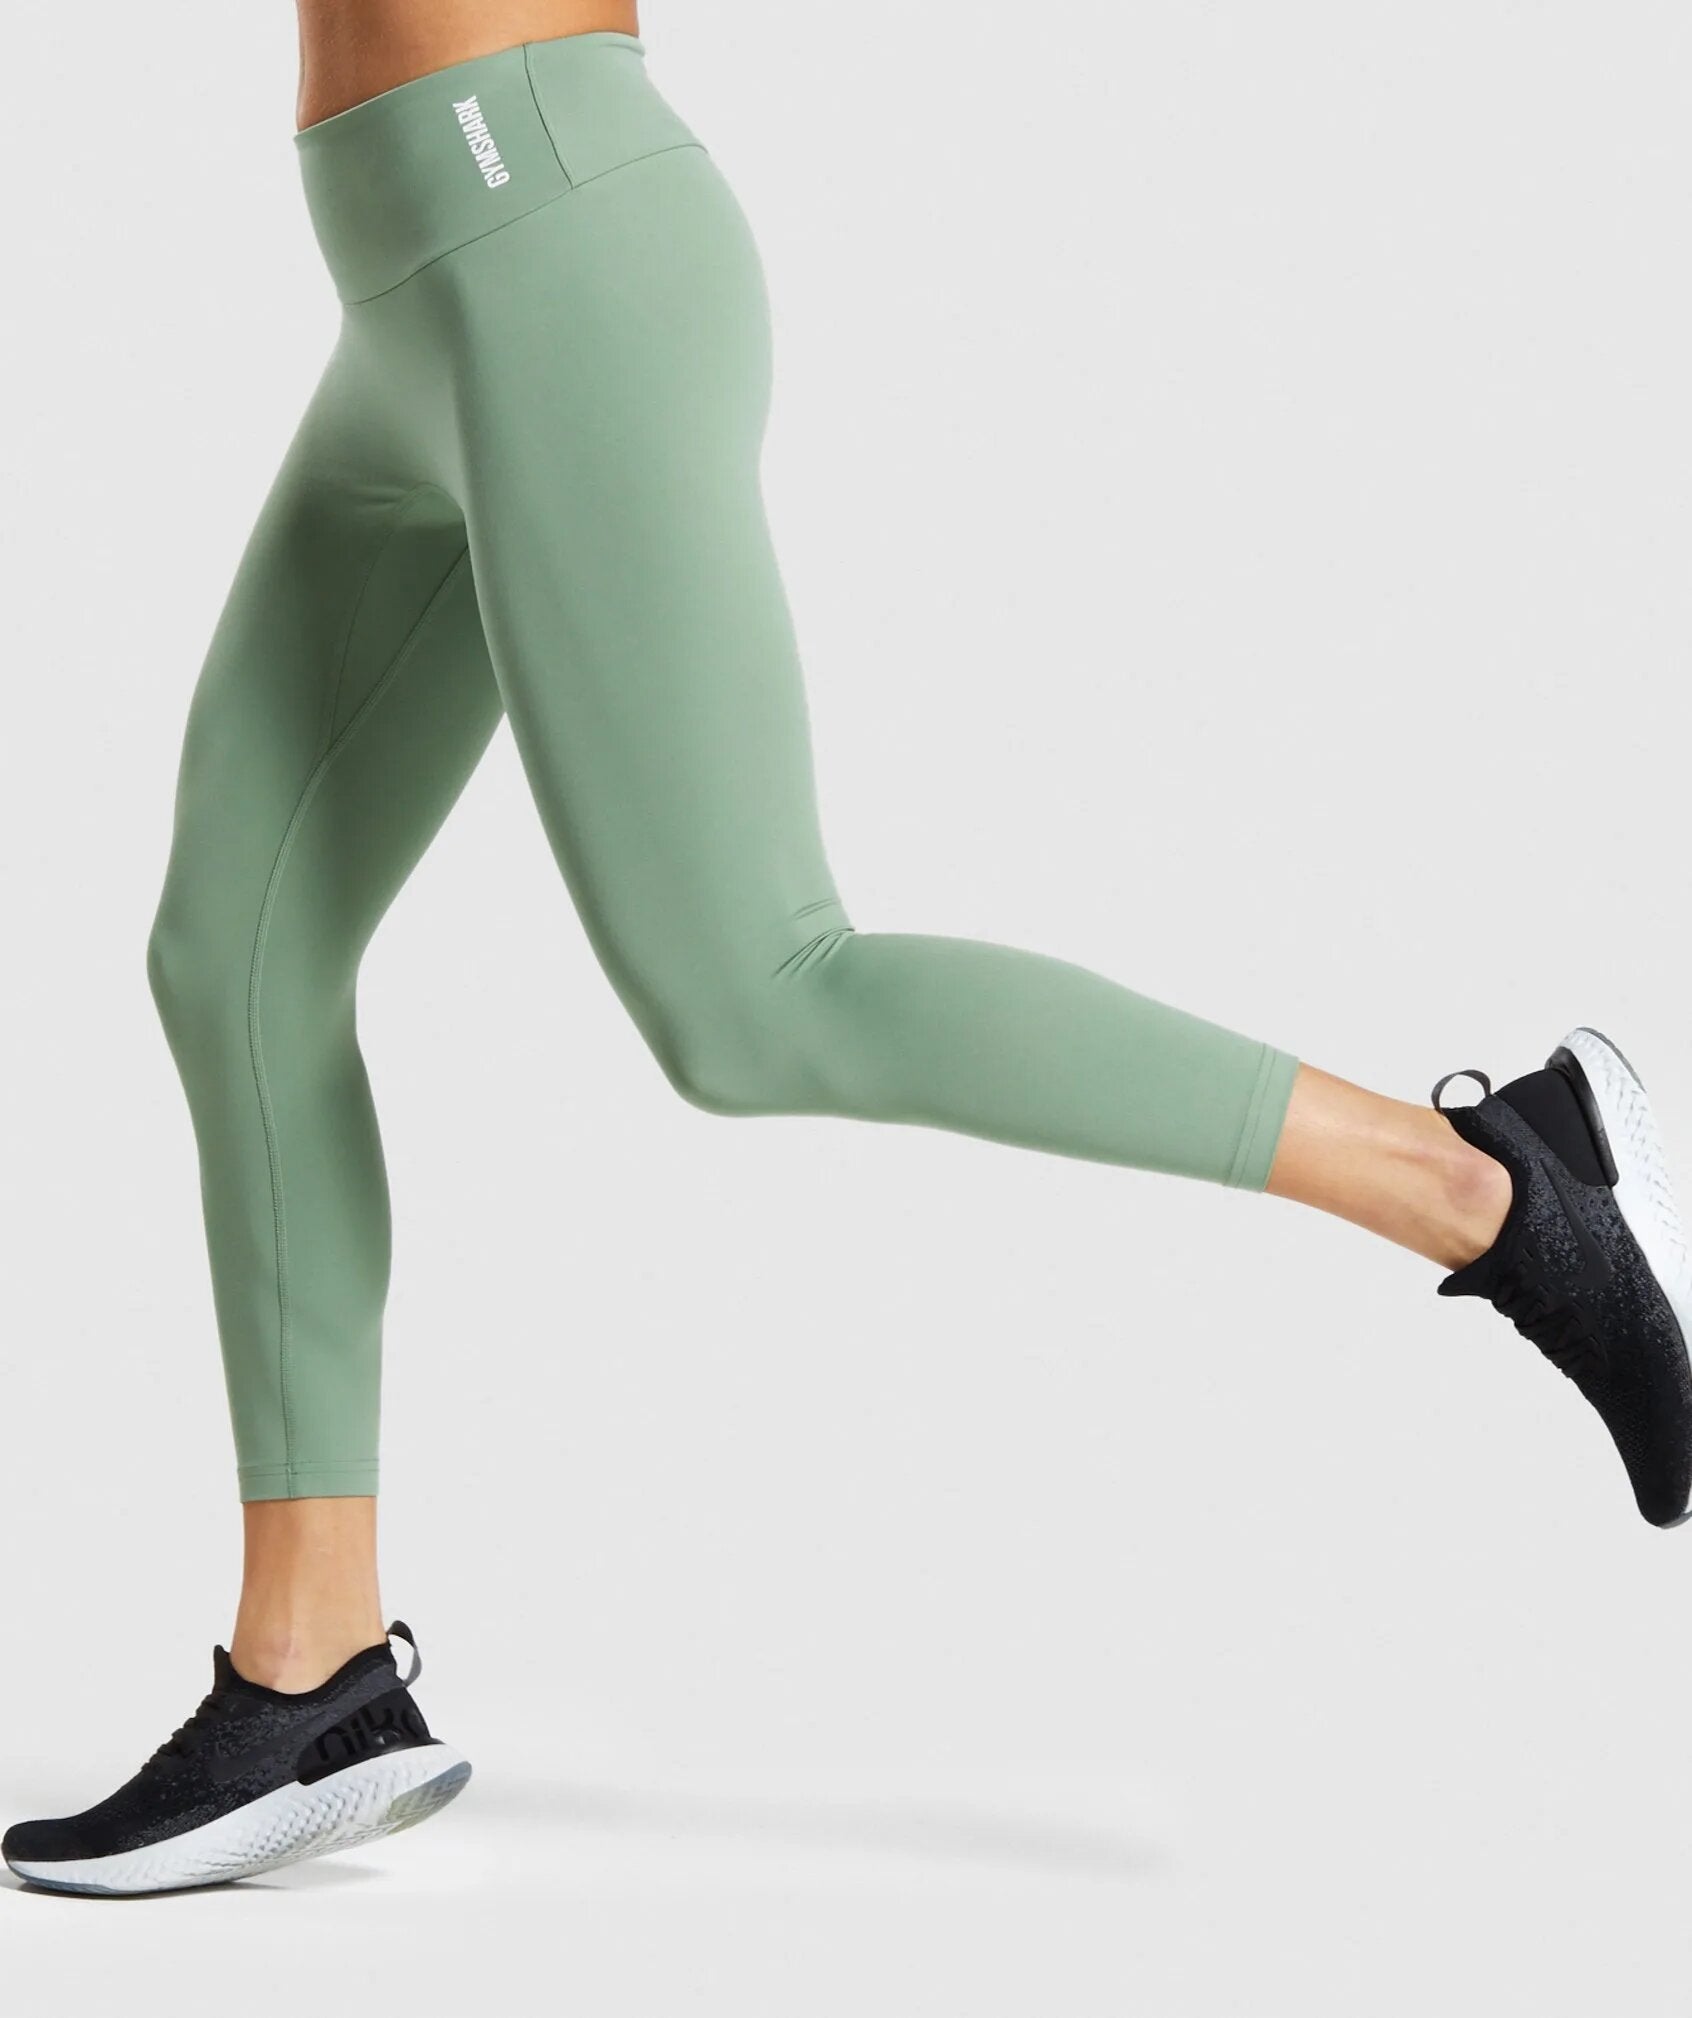 Cheap Workout Leggings That Are The Best For Exercise